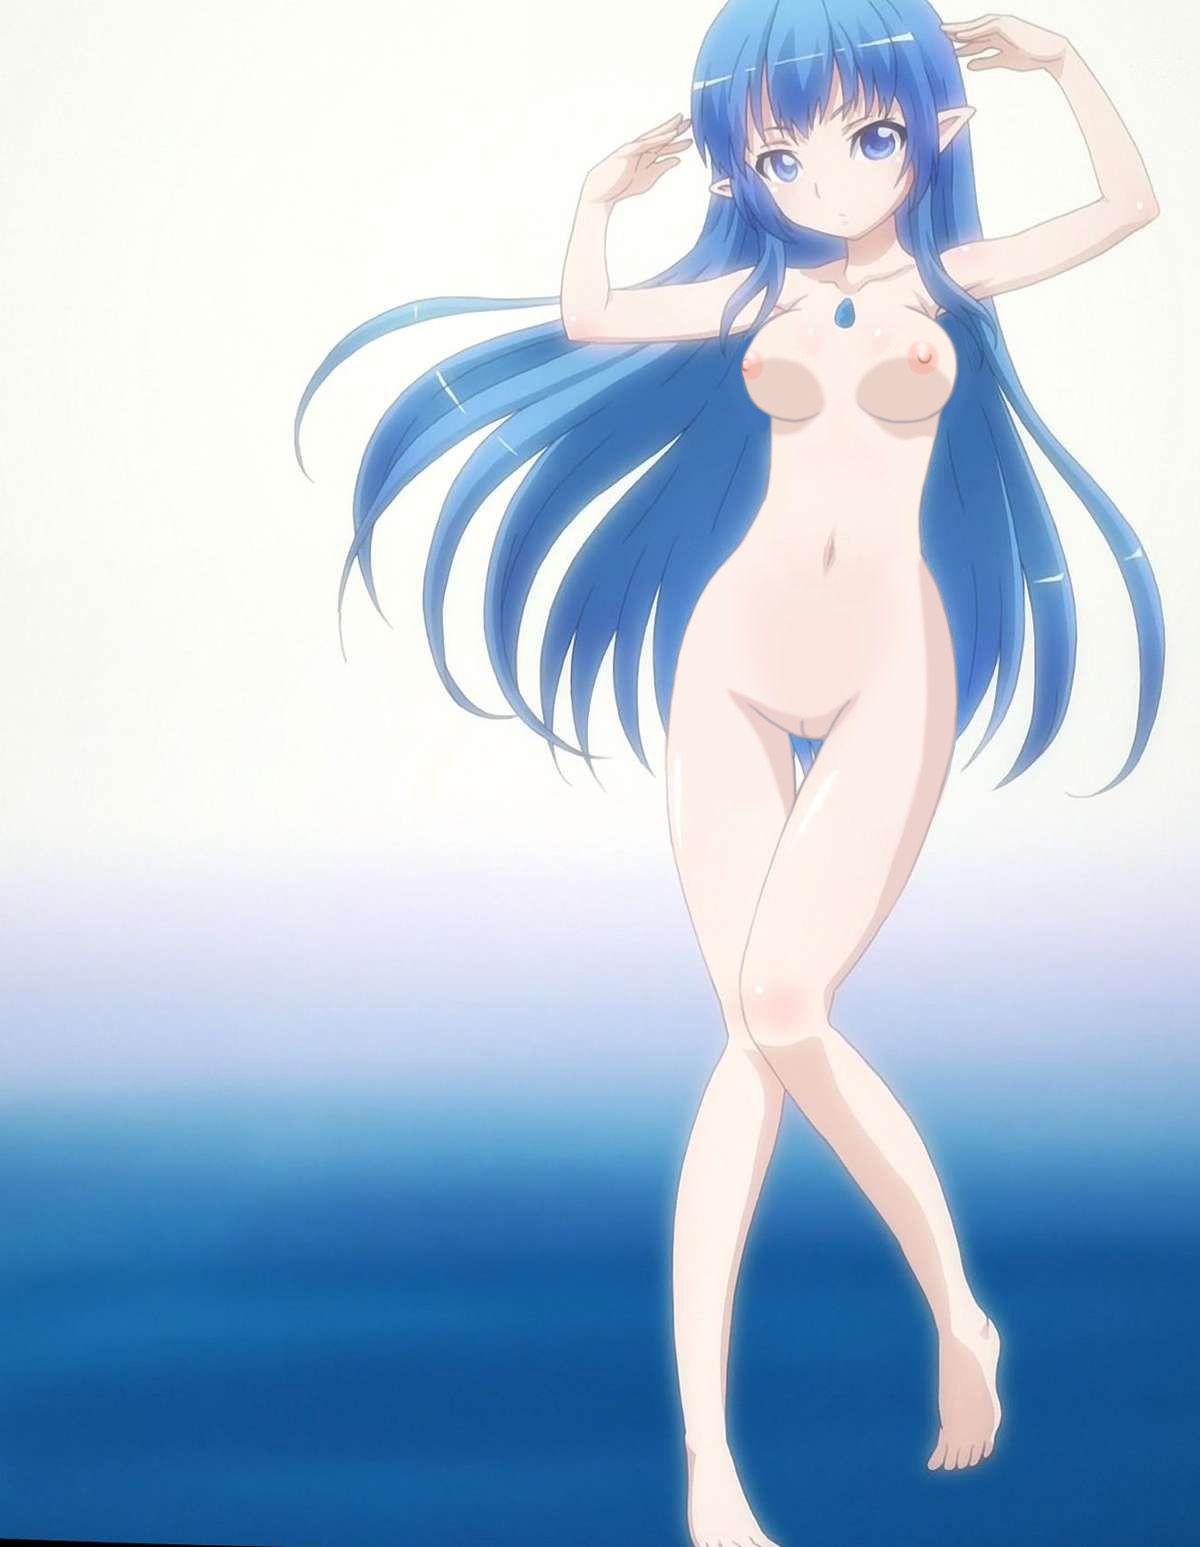 Stripping anime pictures Photoshop image part 5 50 sheets 36